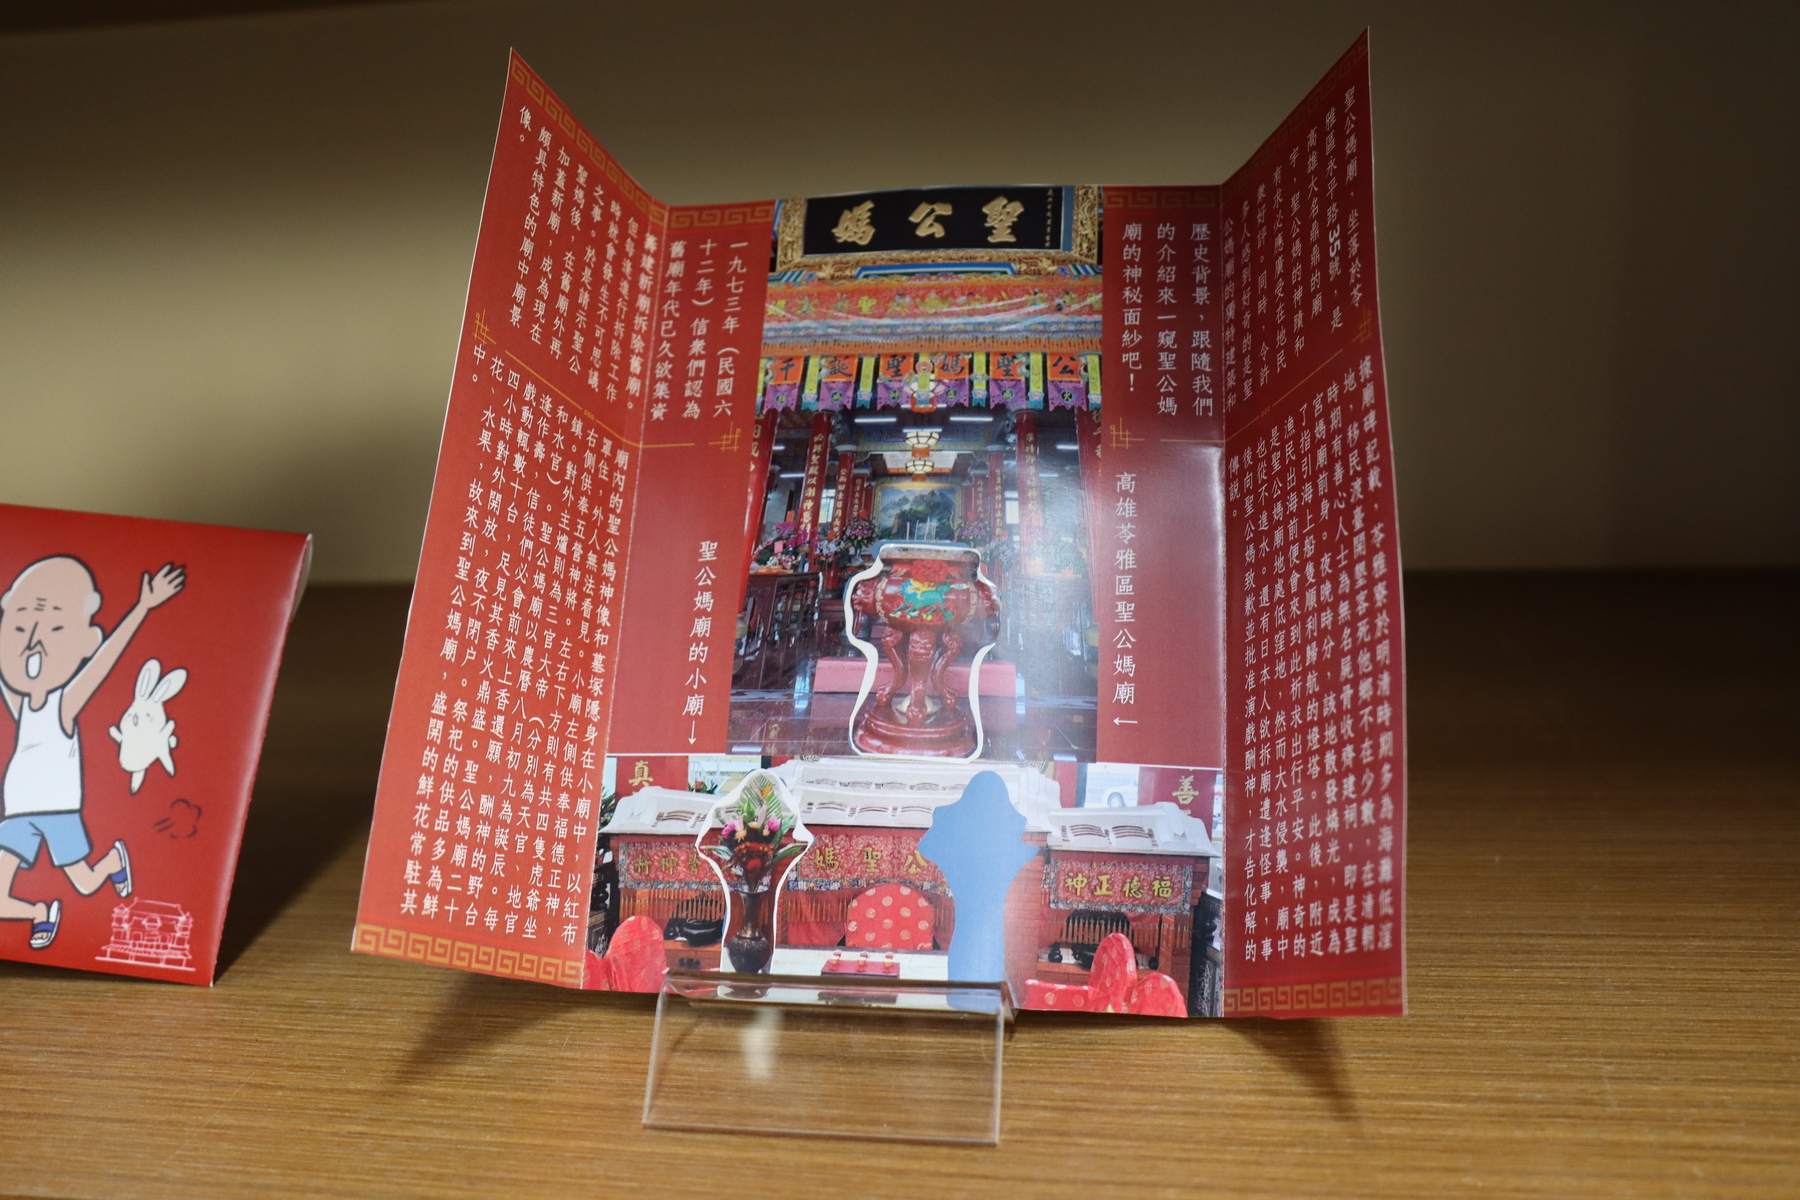 The “Sheng Gong Ma Temple Fun Foldable Card and Sticker” was made by students.